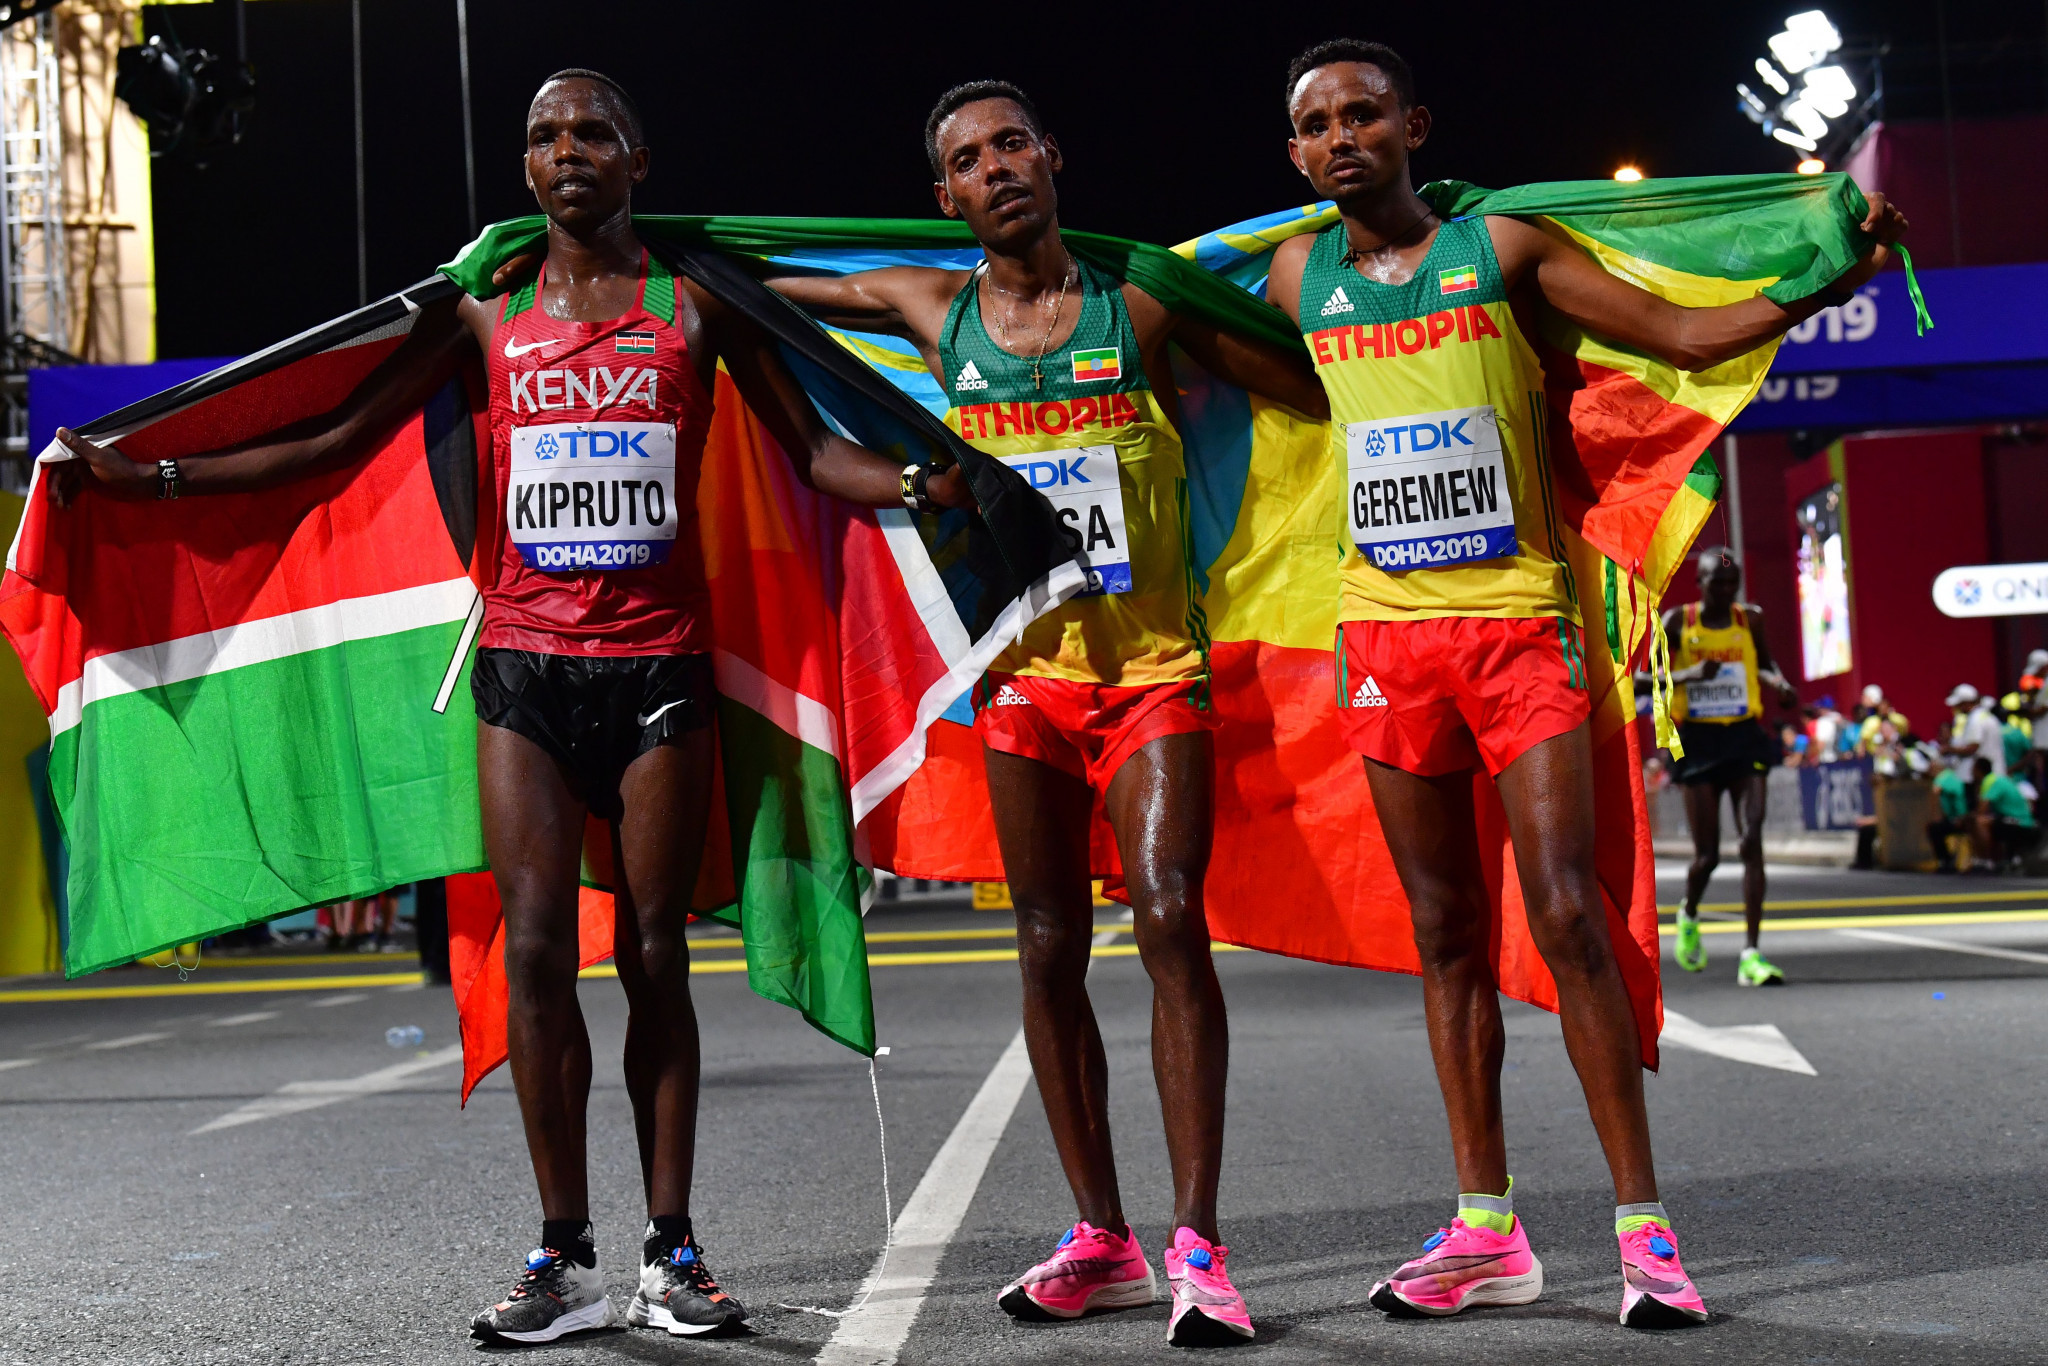 East Africa is considered the powerhouse region of long-distance running ©Getty Images